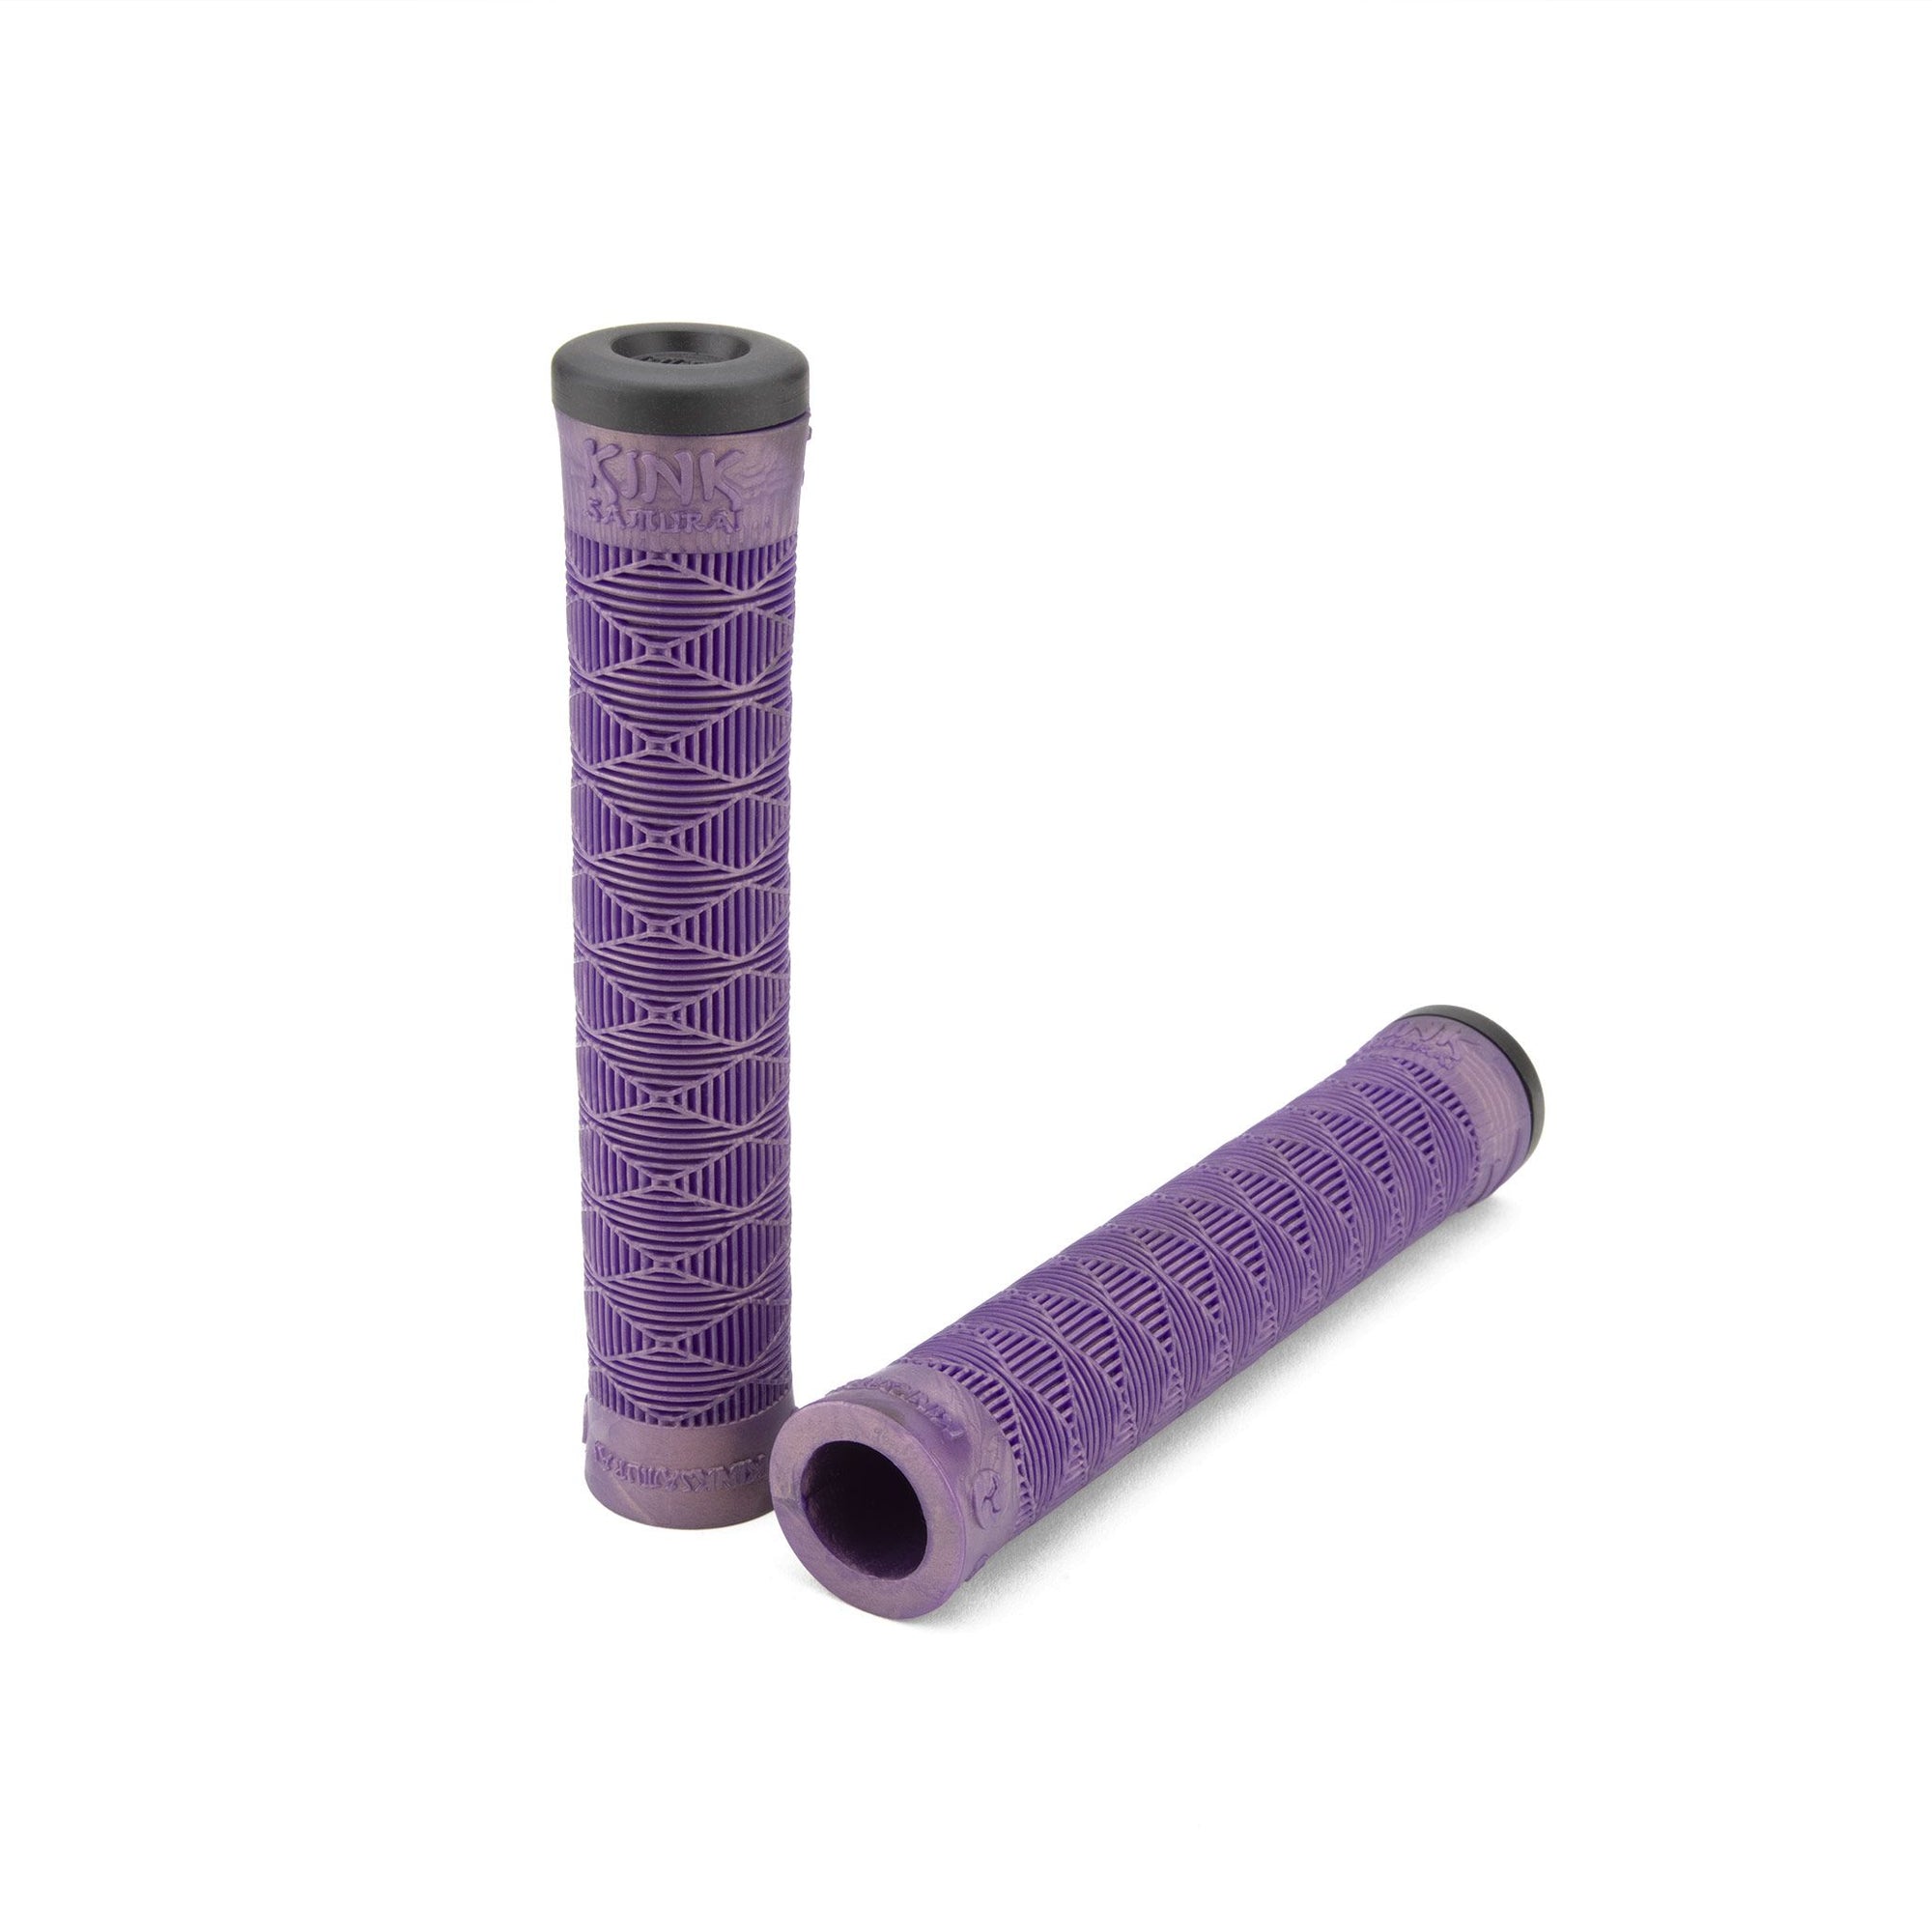 Kink Samurai Bicycle Grips (Various Colors) - Downtown Bicycle Works 